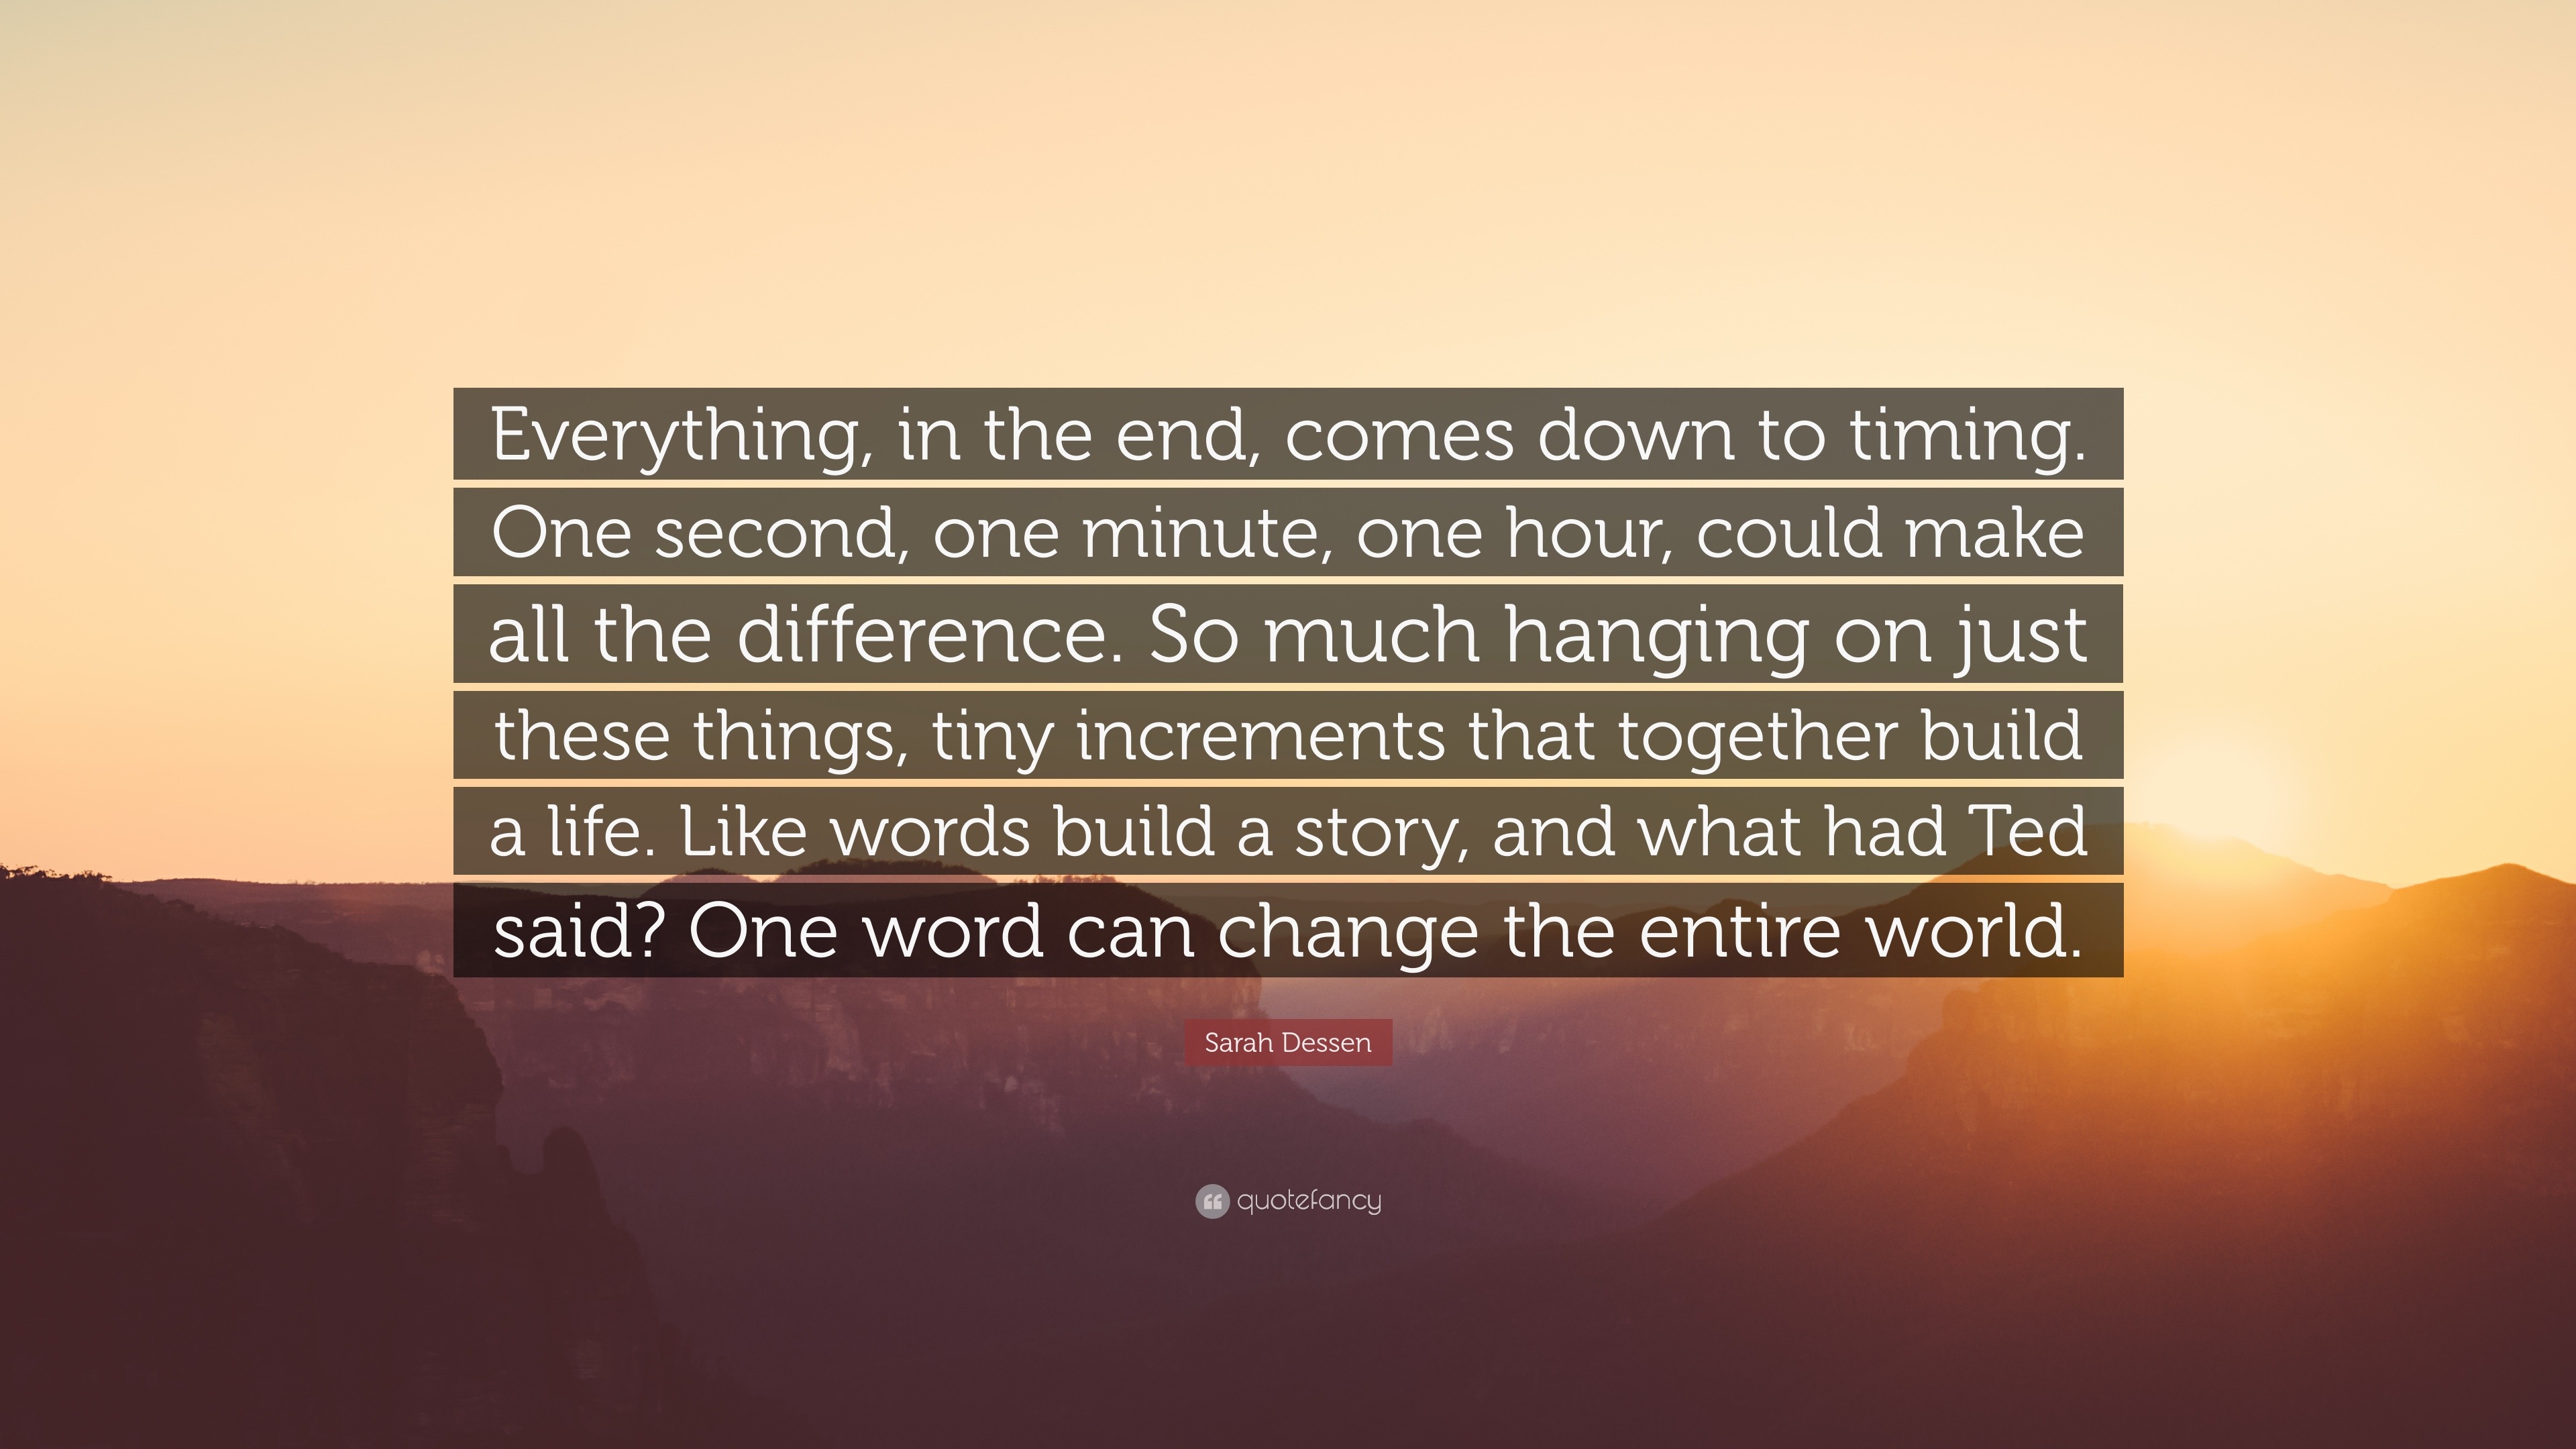 Sarah Dessen Quote “Everything in the end es down to timing